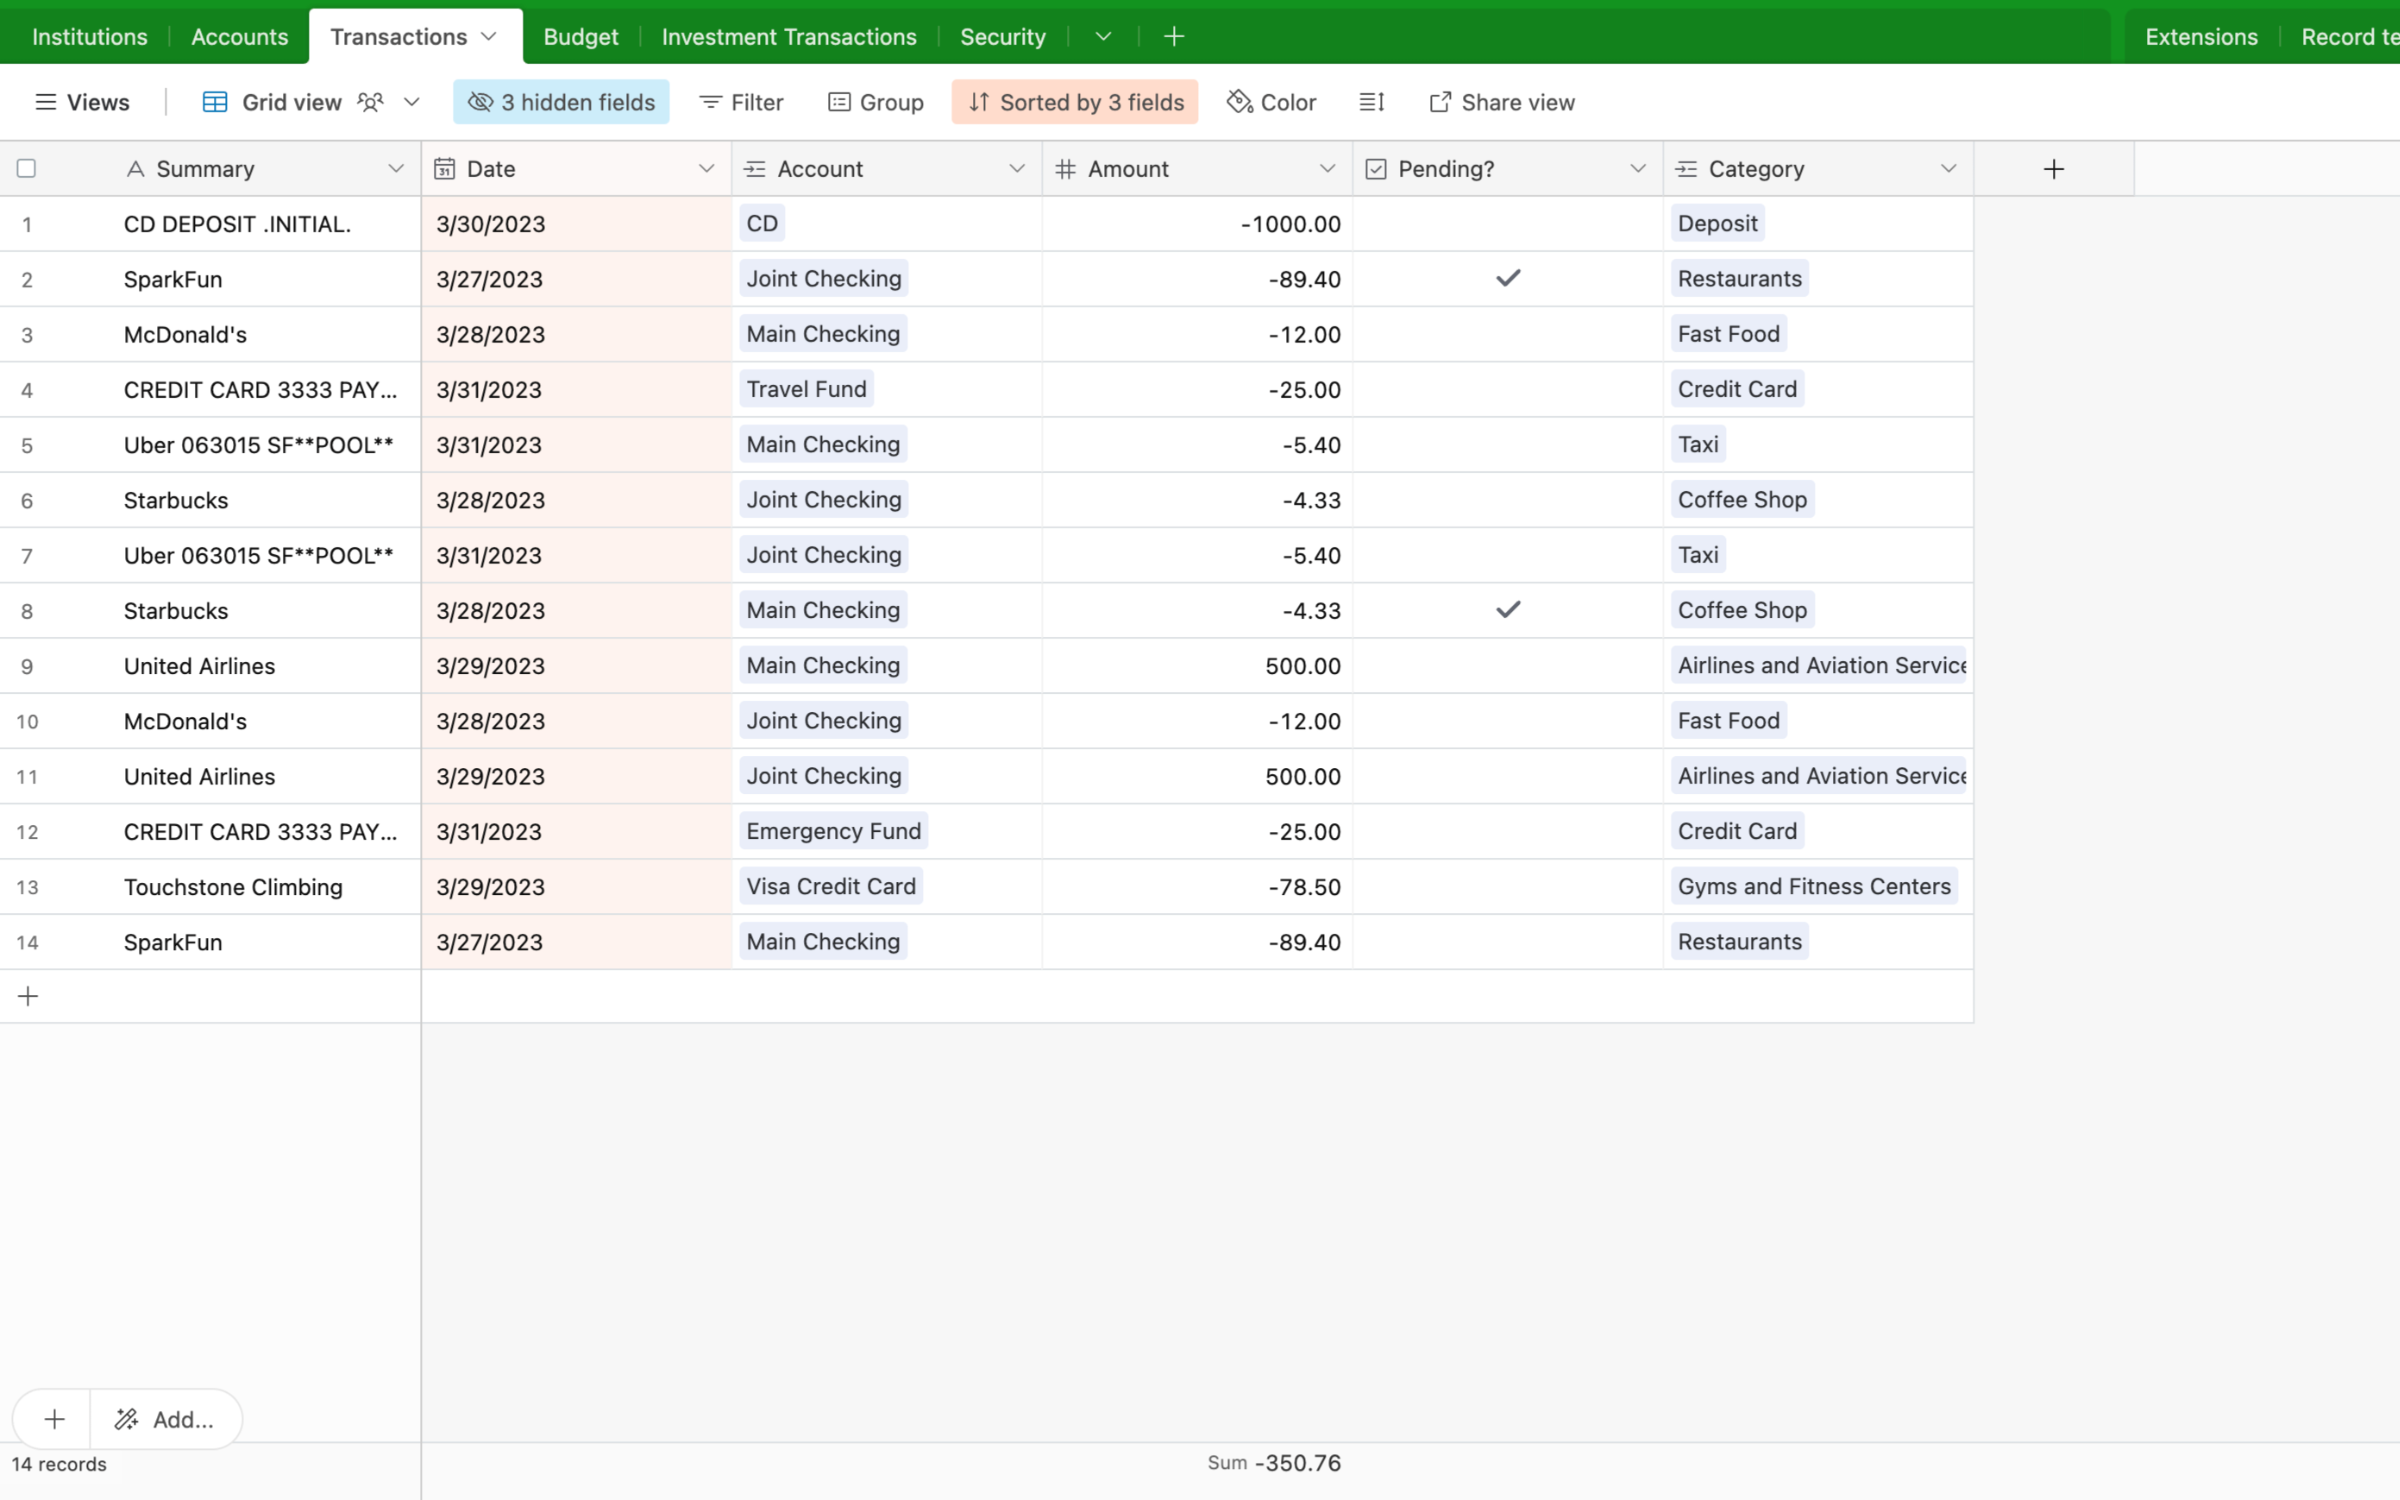 How to Import Bank Transactions into Airtable